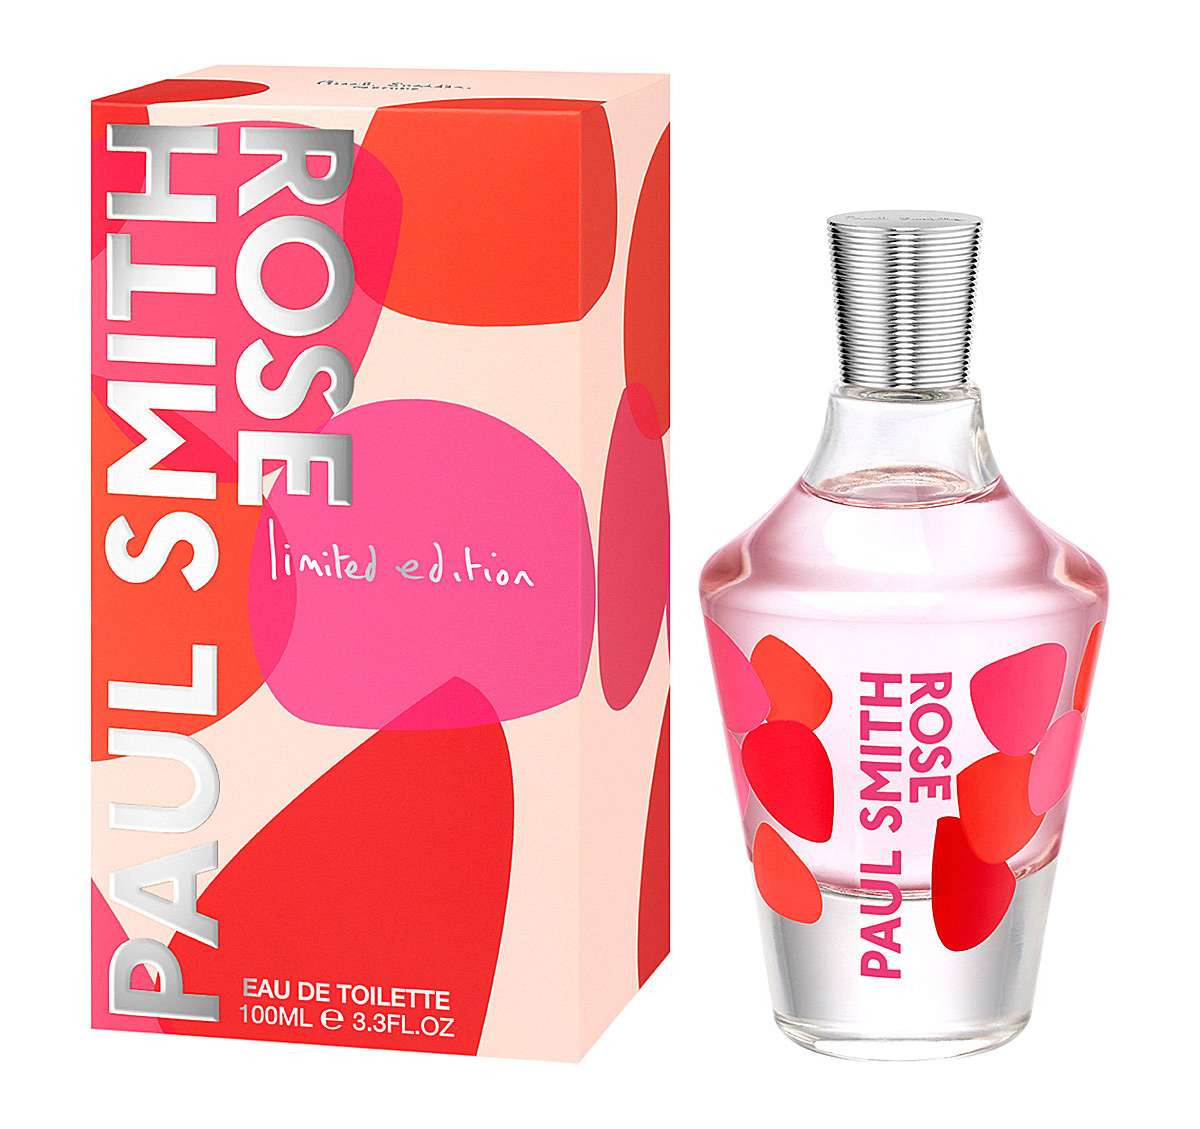 Paul Smith Rose Limited Edition 2017 Paul Smith perfume - a new